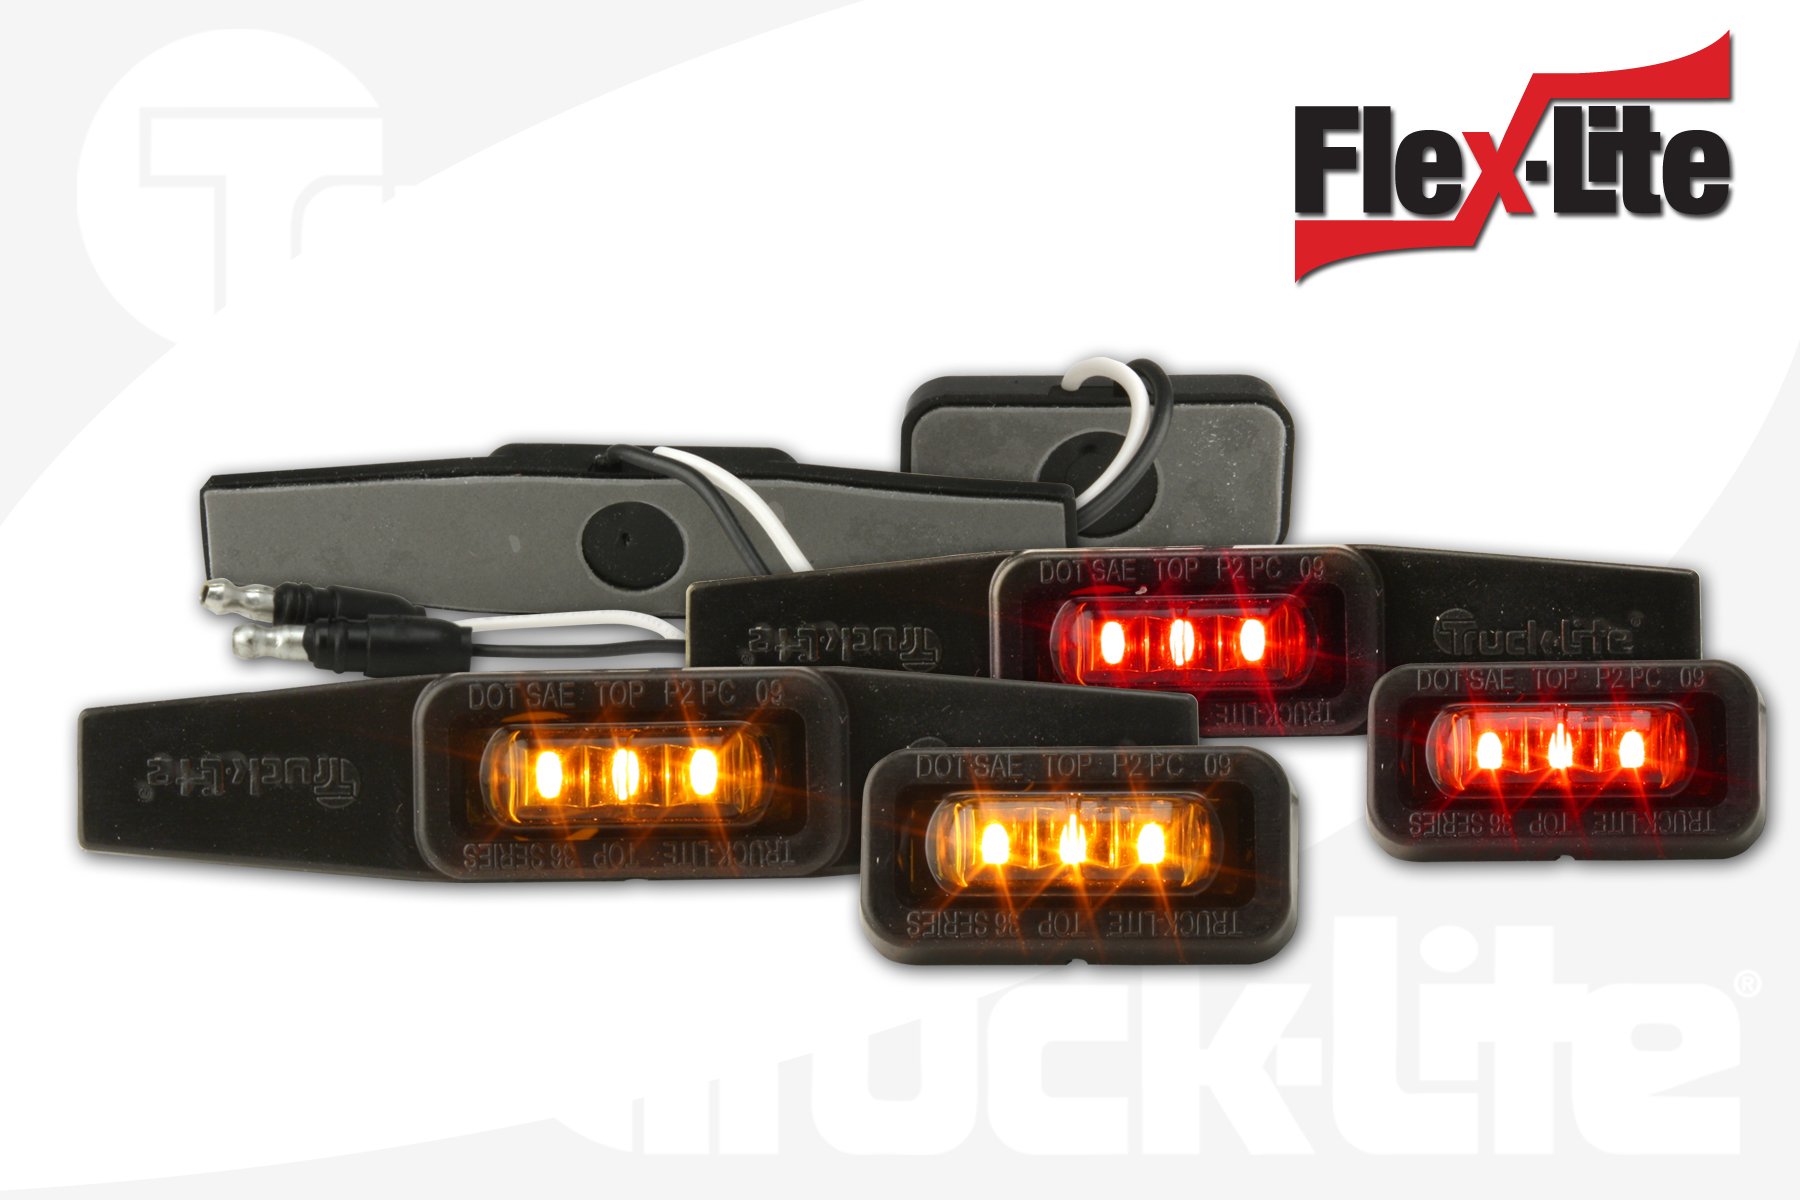 36 Series LED Flex-Lite - Winged & Non-Winged